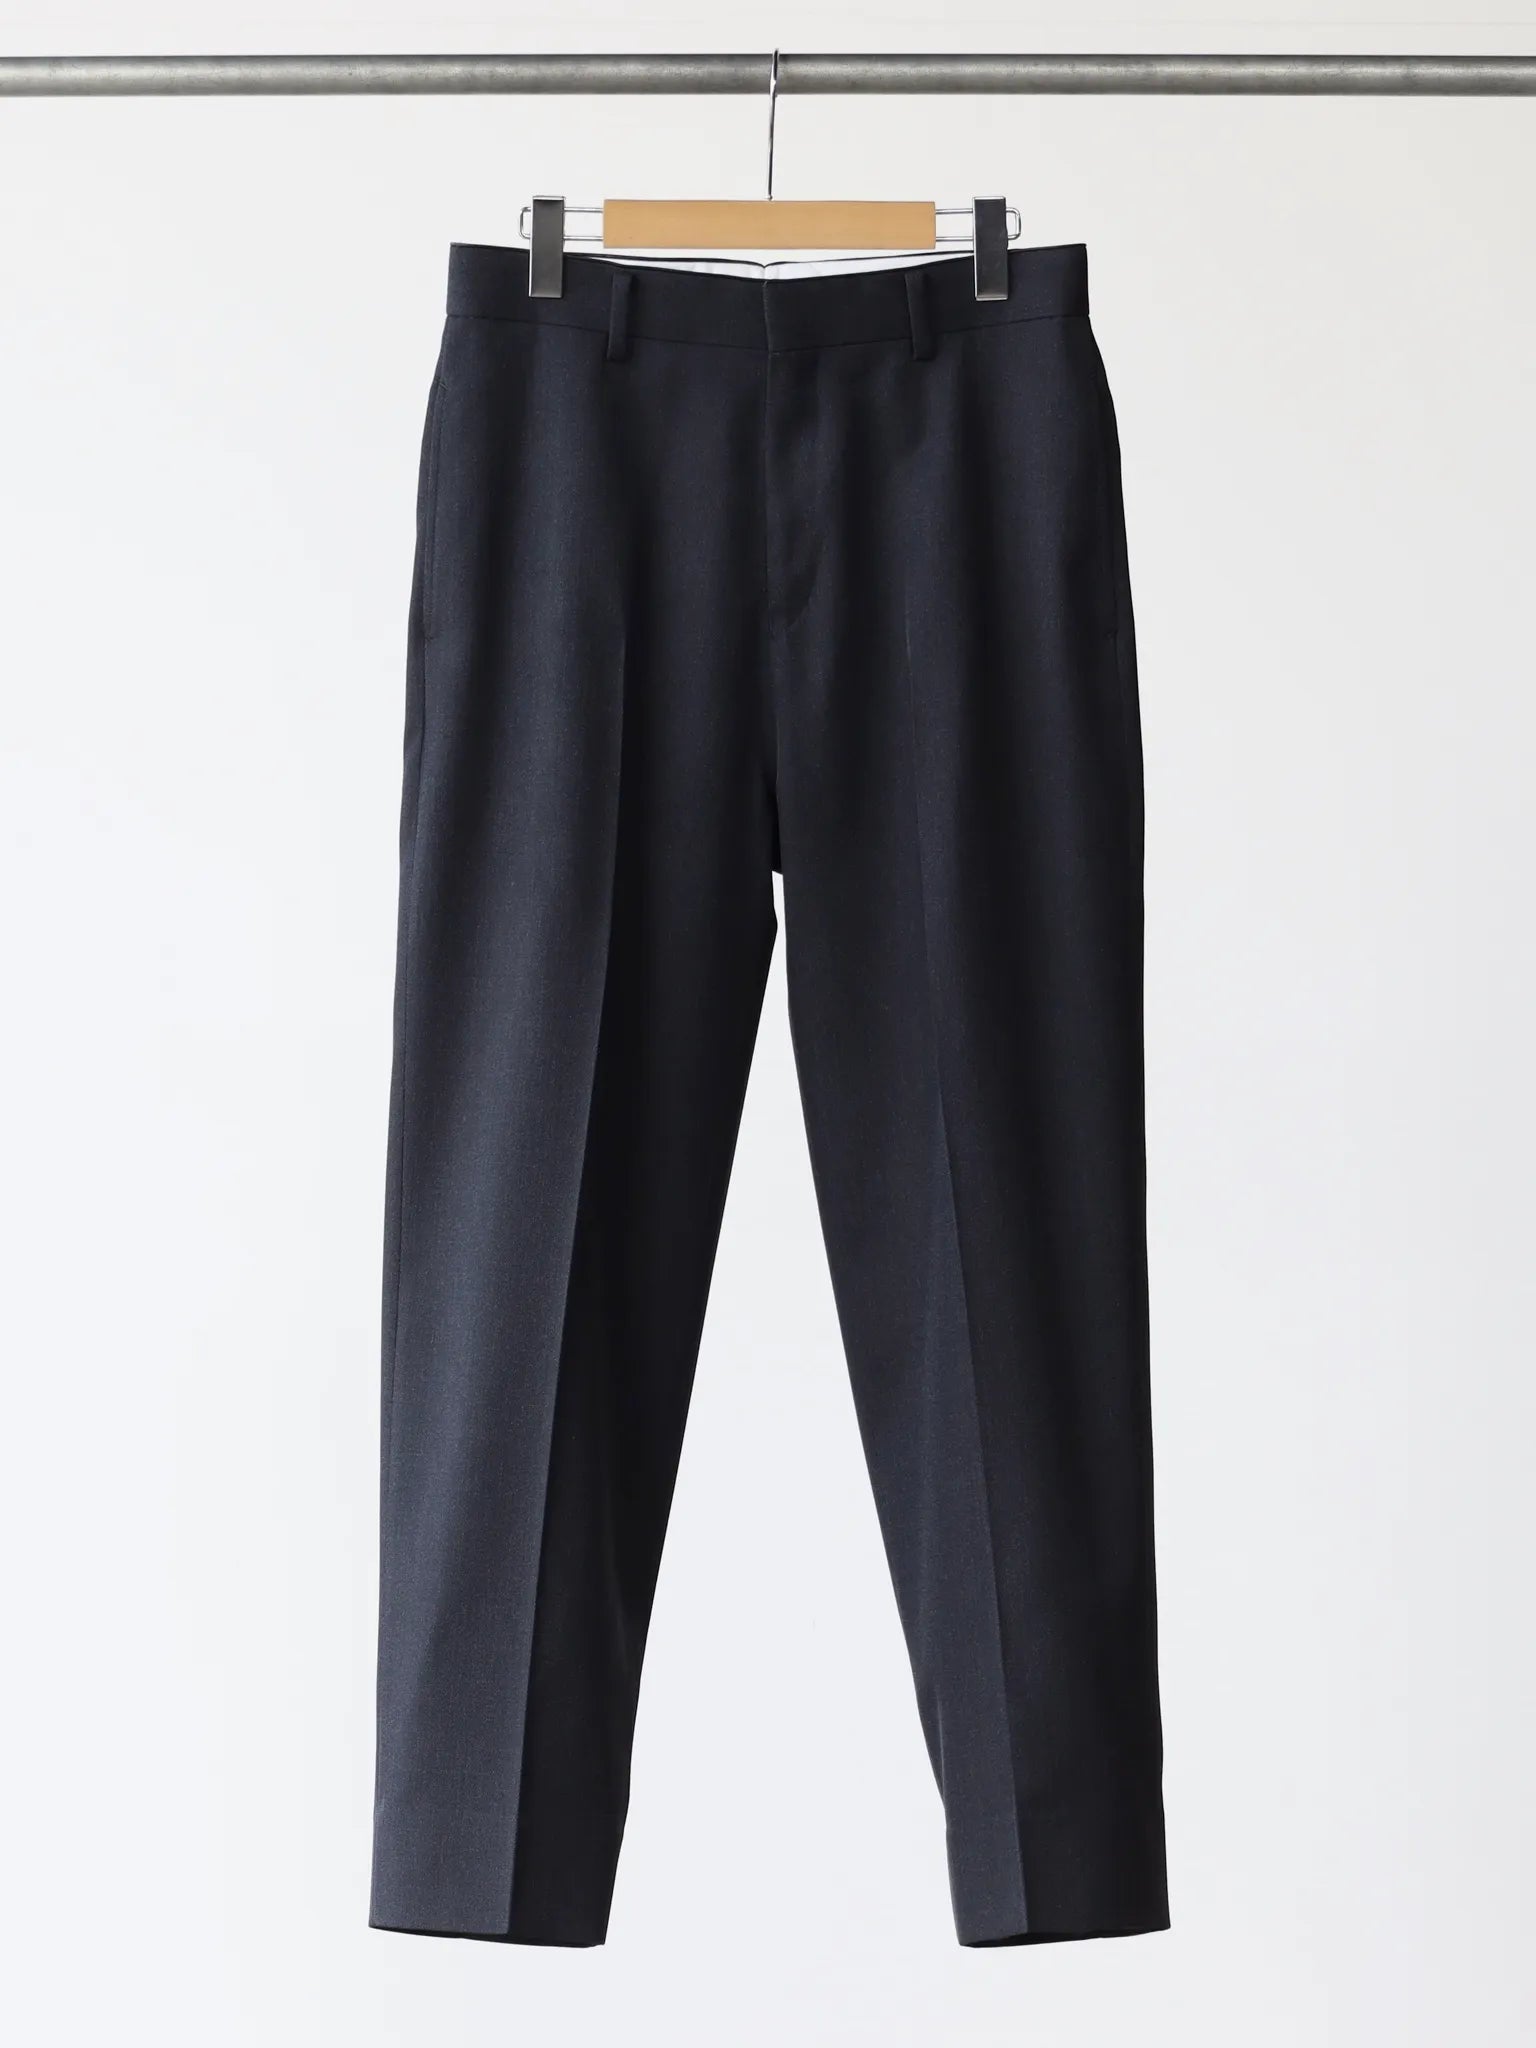 a-presse-covert-cloth-trousers-charcoal-1